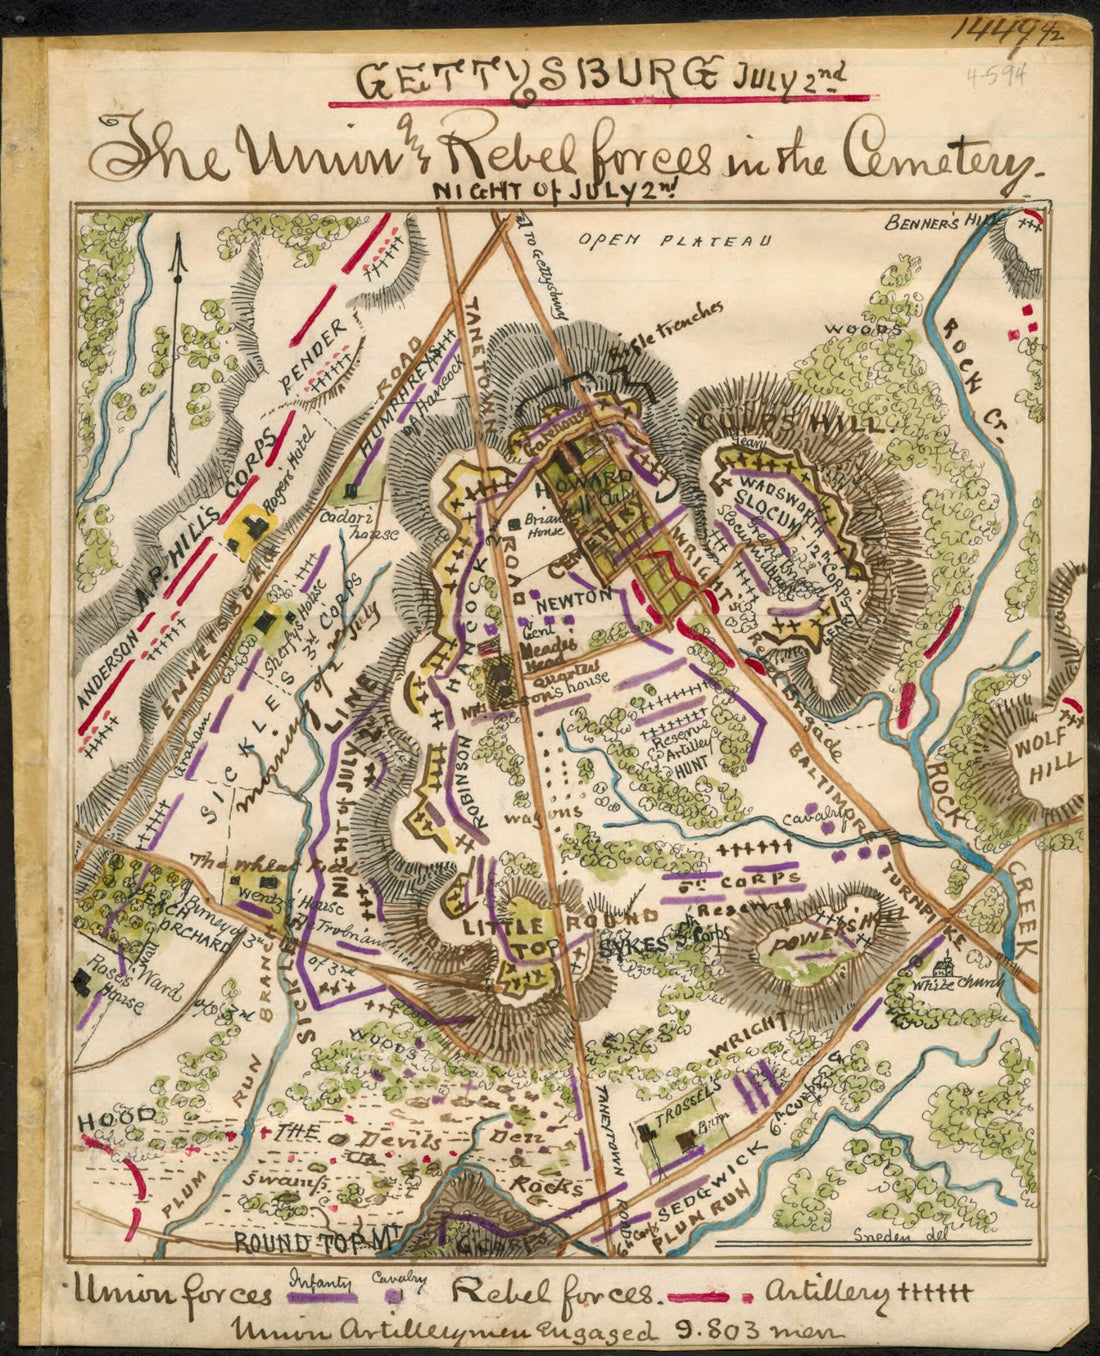 This old map of Gettysburg July 2nd the Union and Rebel Forces In the Cemetery from 07-02 was created by Robert Knox Sneden in 07-02